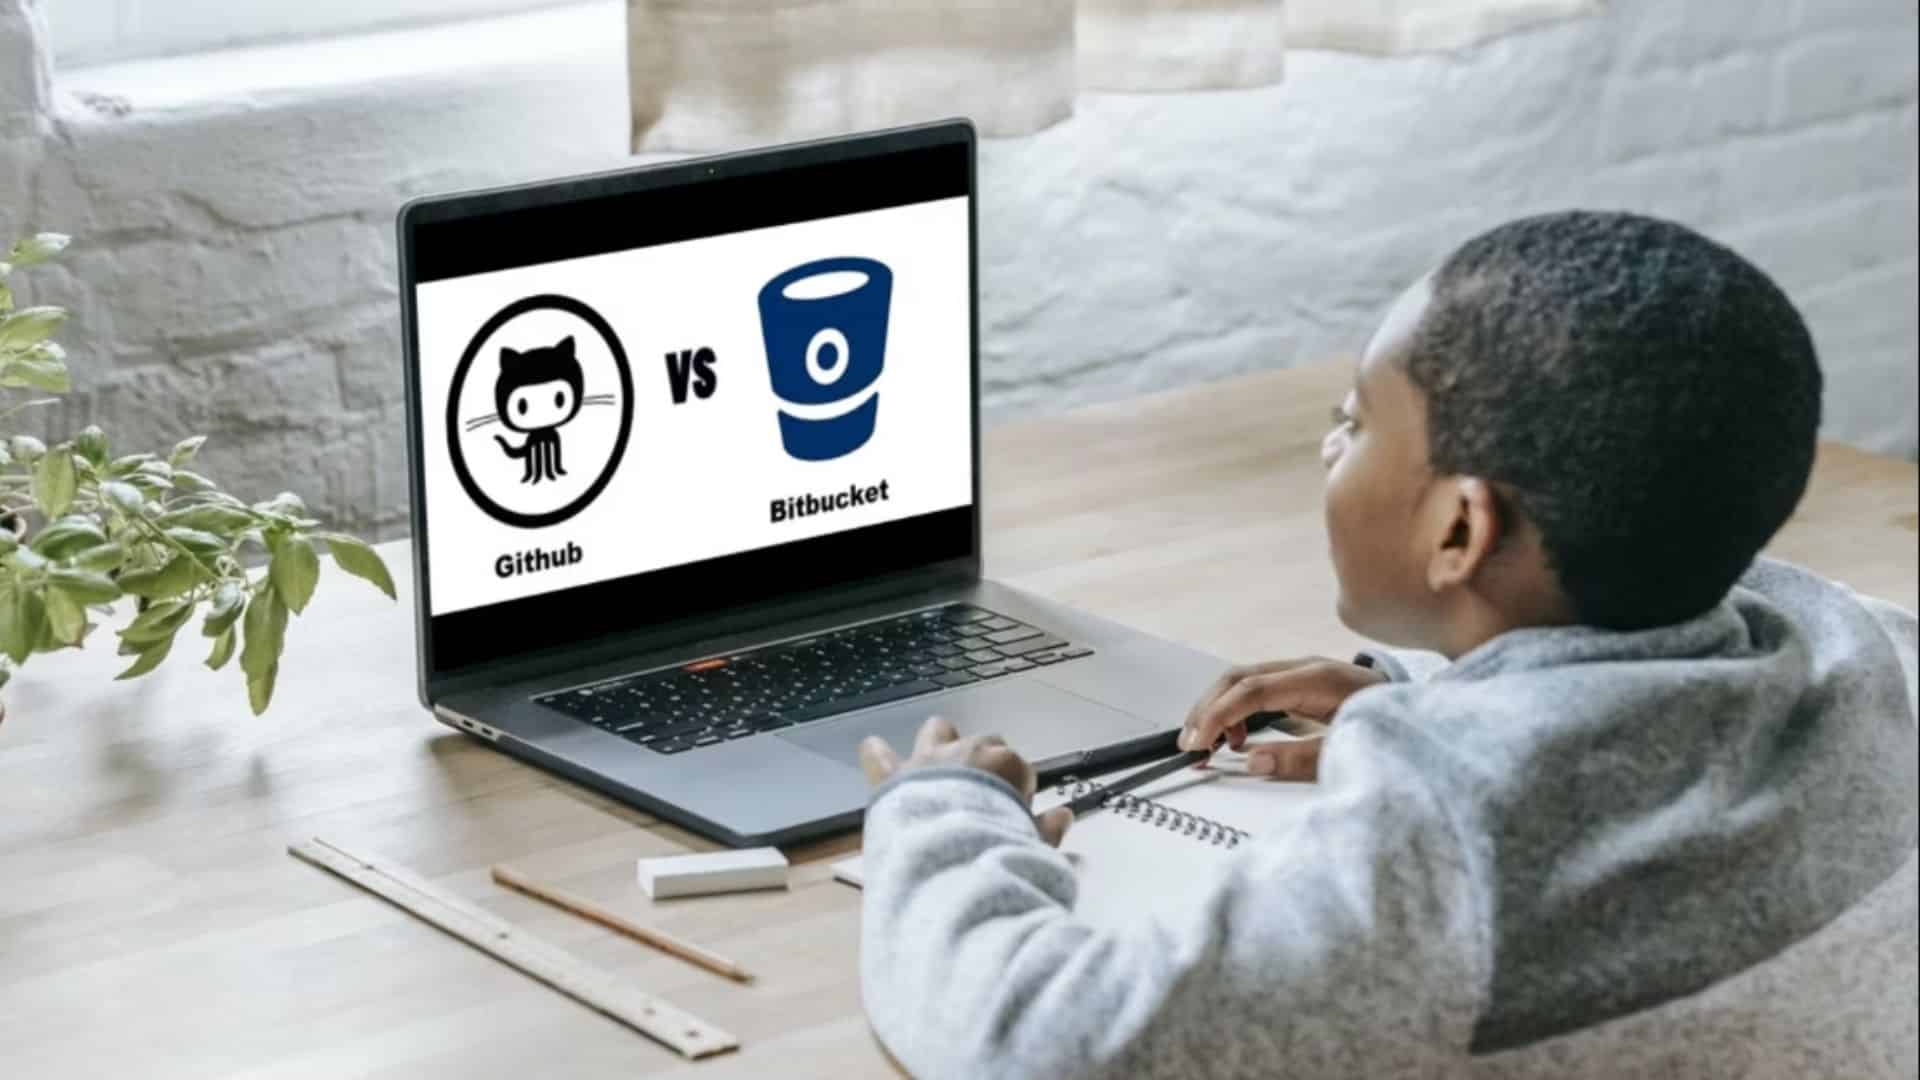 Bitbucket vs Github: Which One Should be Your Pick?